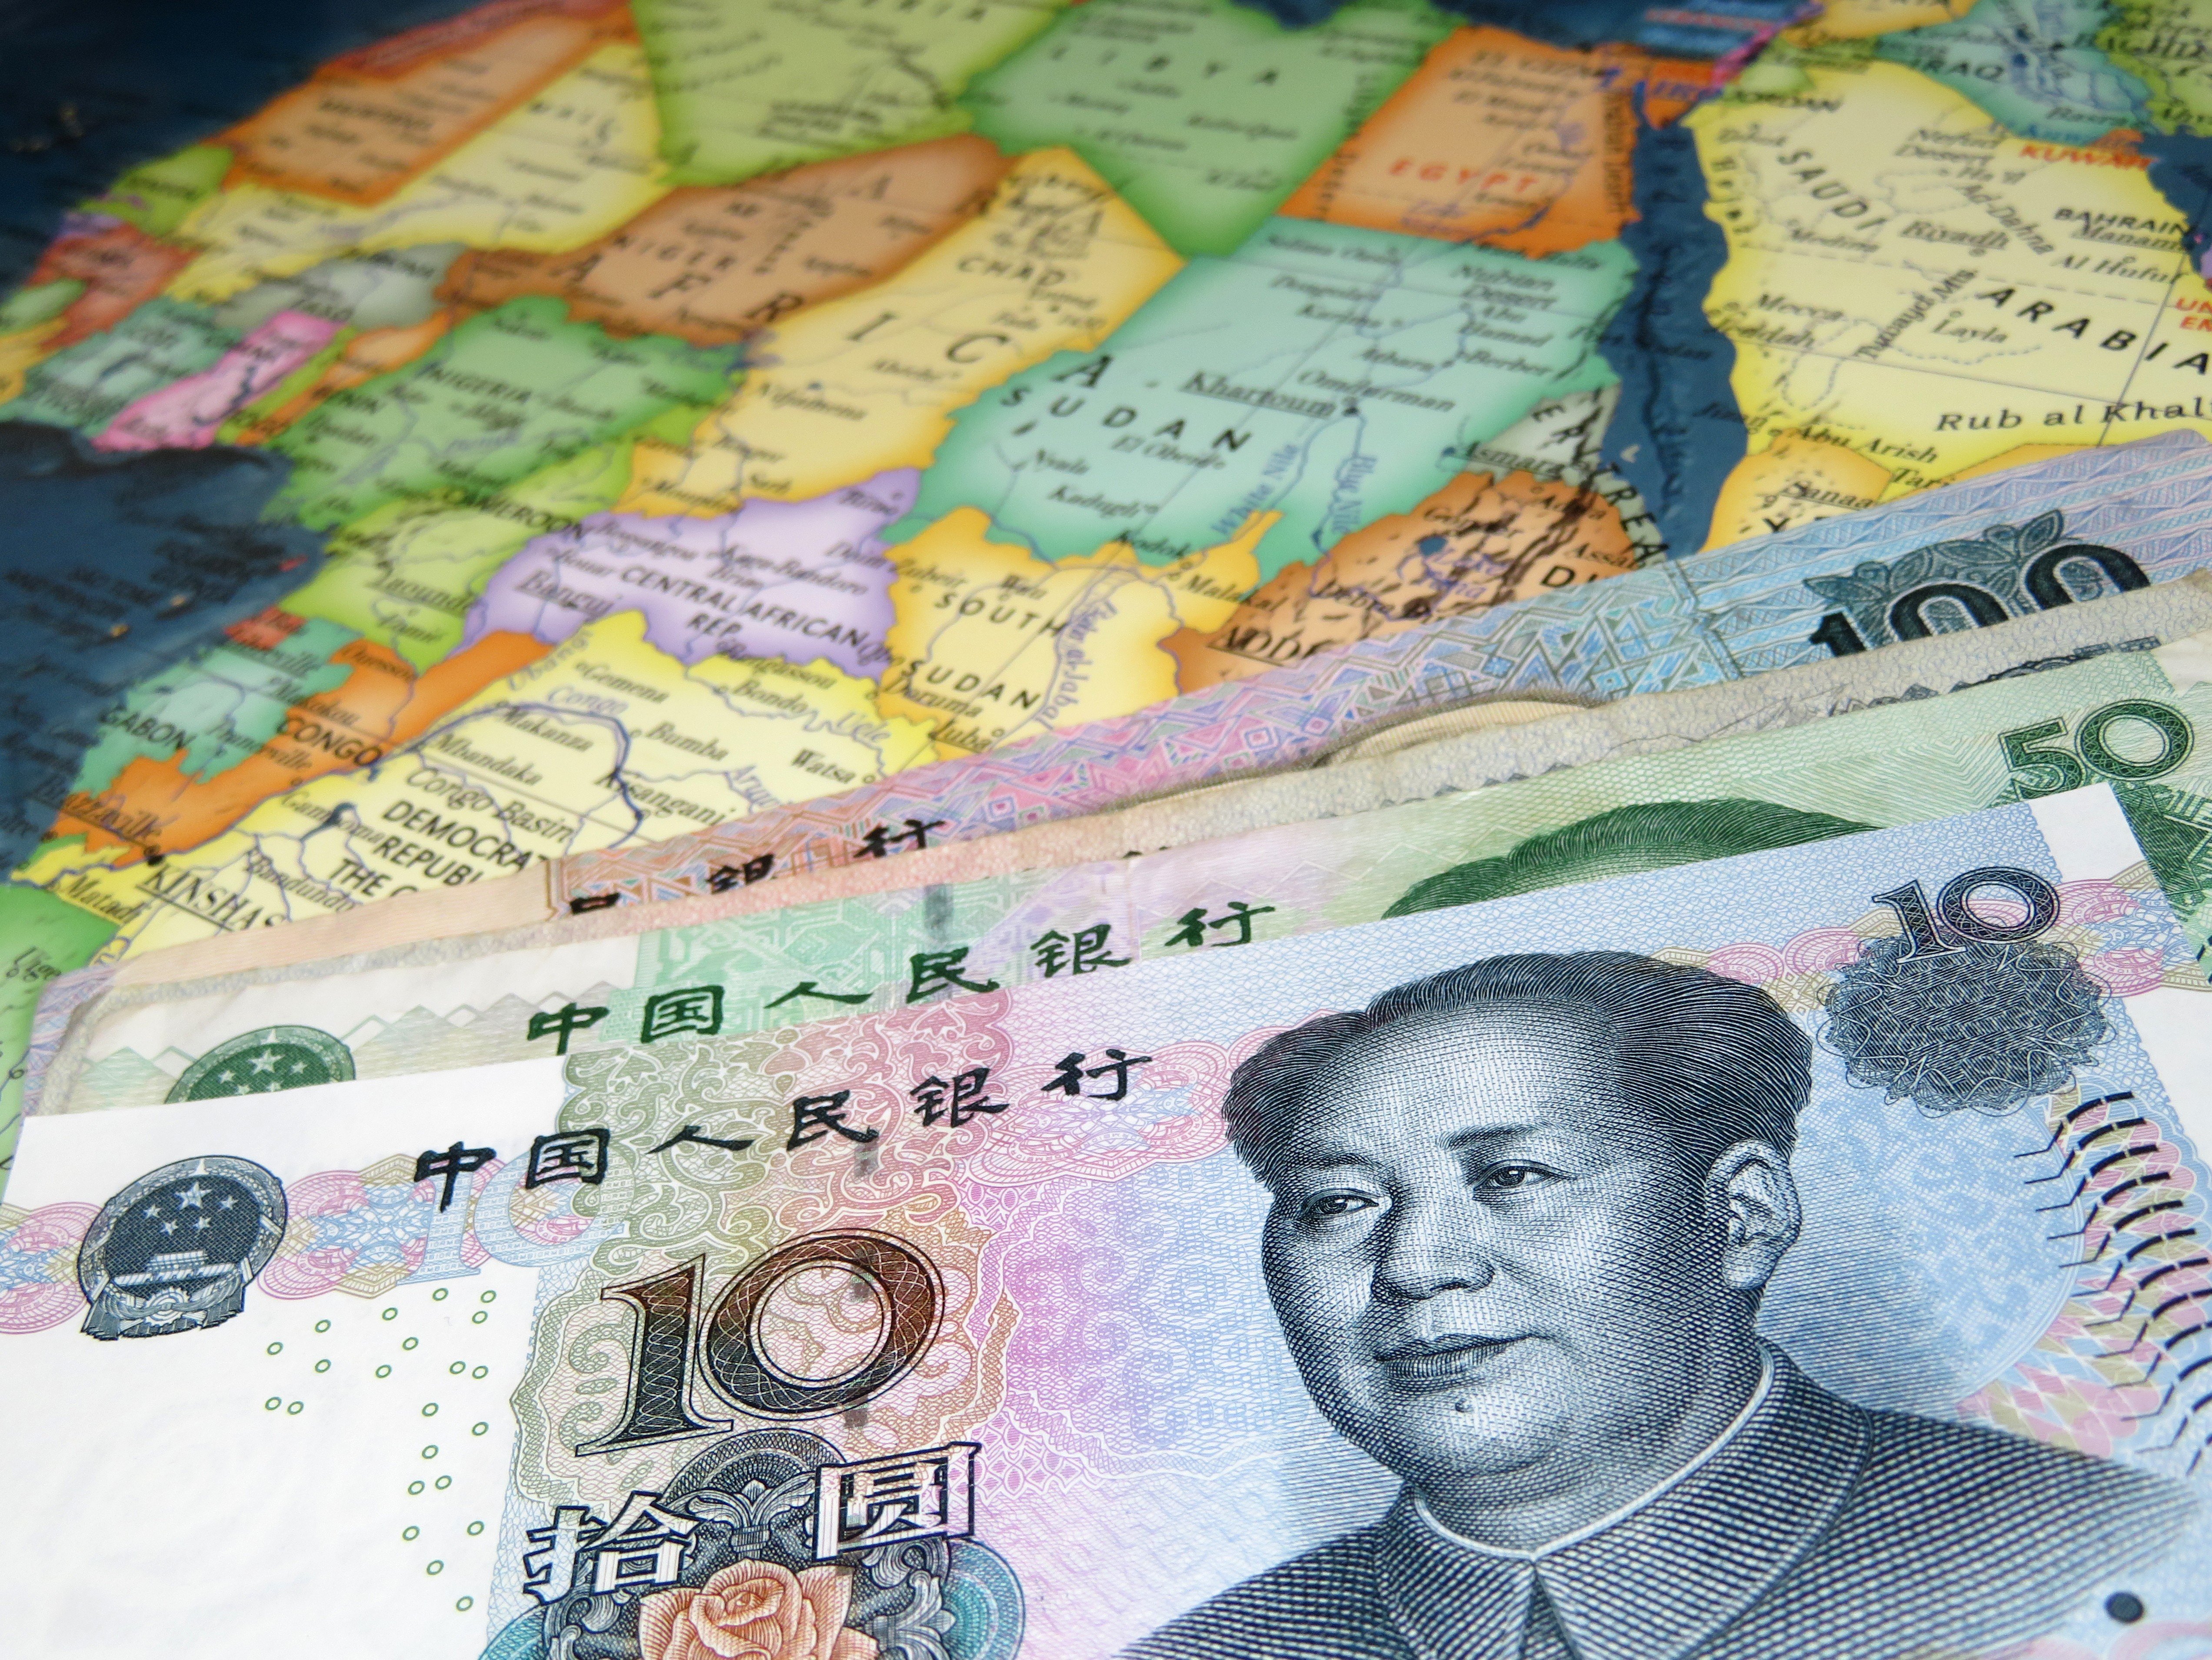 Chinese VCs also tend to be interested in companies that have intersections with China – meaning that they either source significantly from China or can export to the country. Photo: Shutterstock